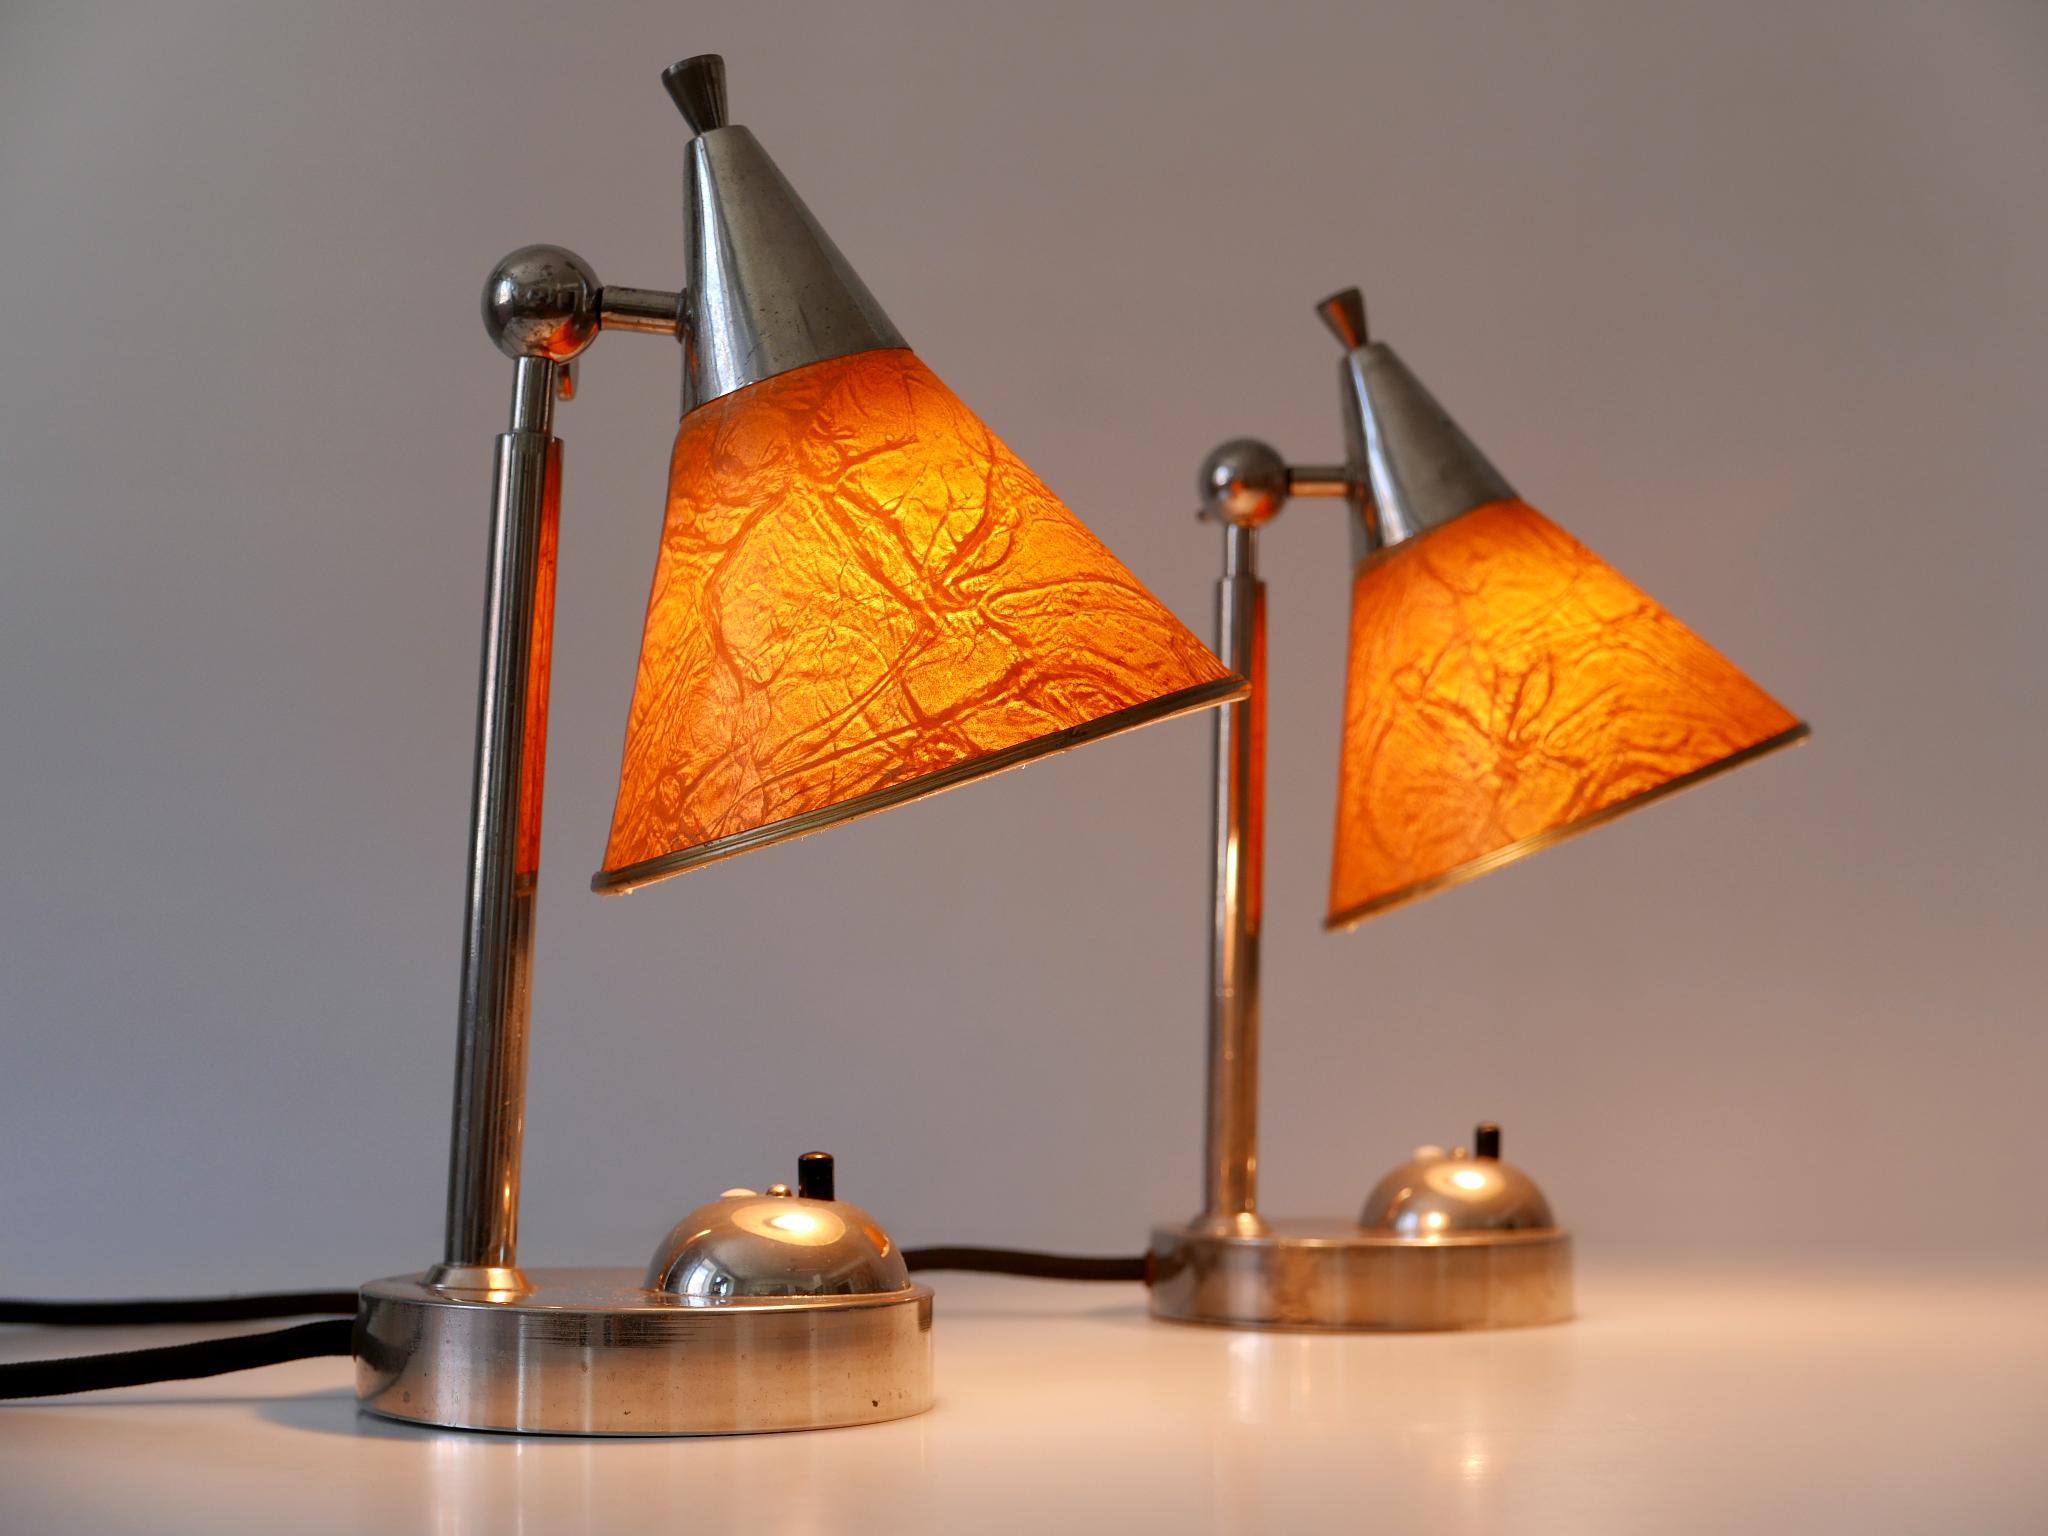 Plated Set of Two Rare Art Deco Bauhaus Bedside Table Lamps or Sconces Germany 1920s For Sale